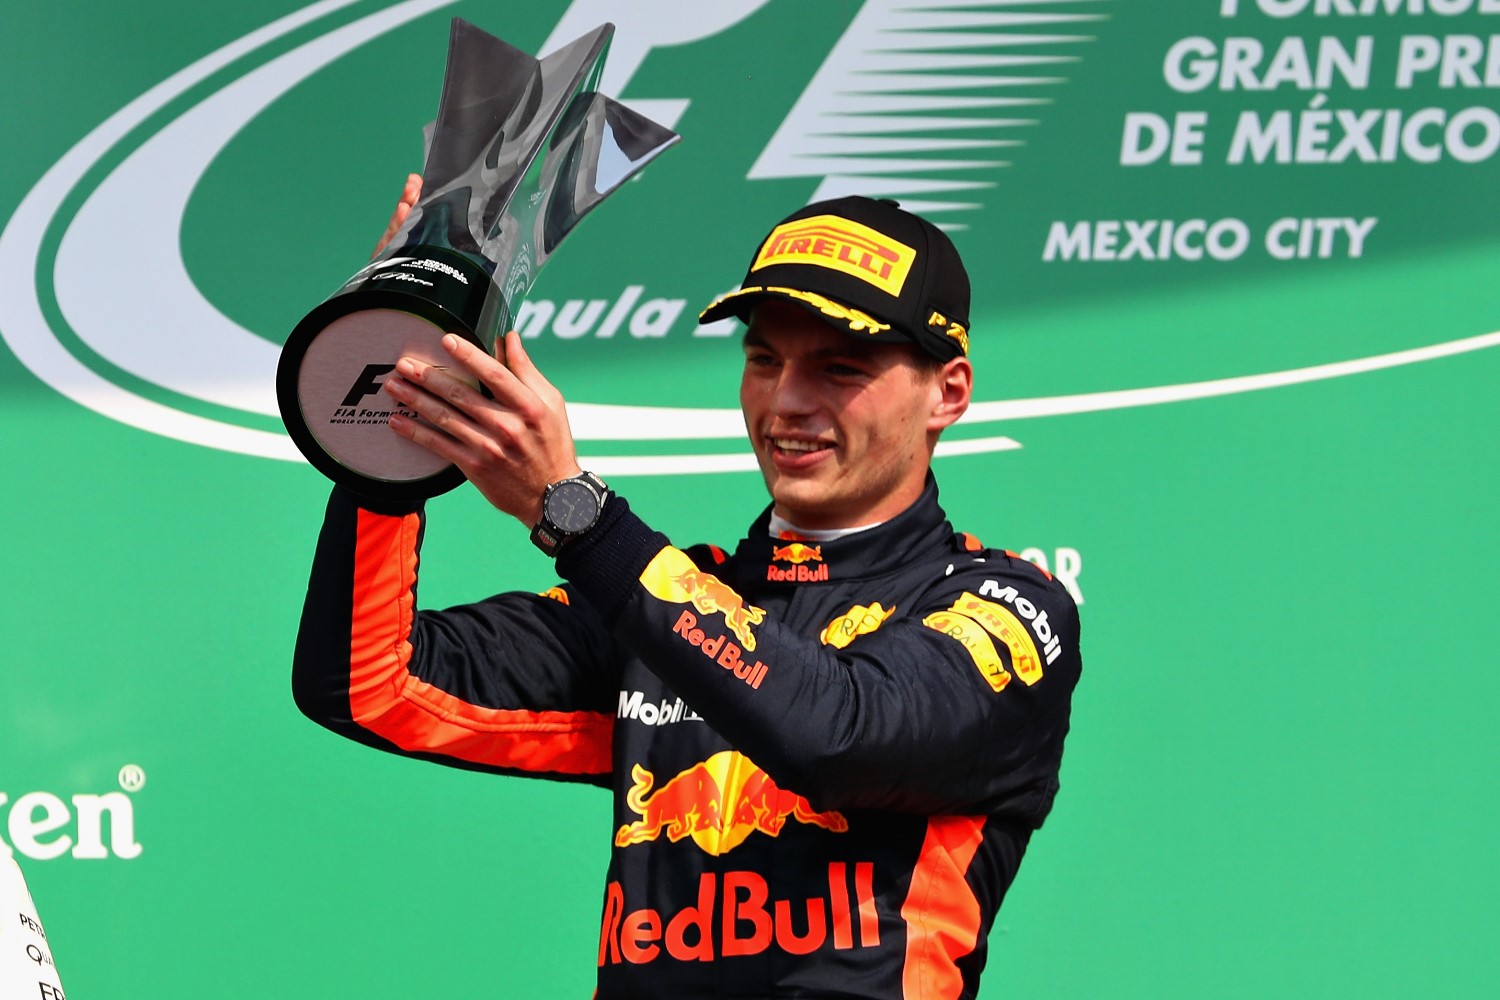 Fresh off his win in Mexico City, Verstappen set to light up Las Vegas